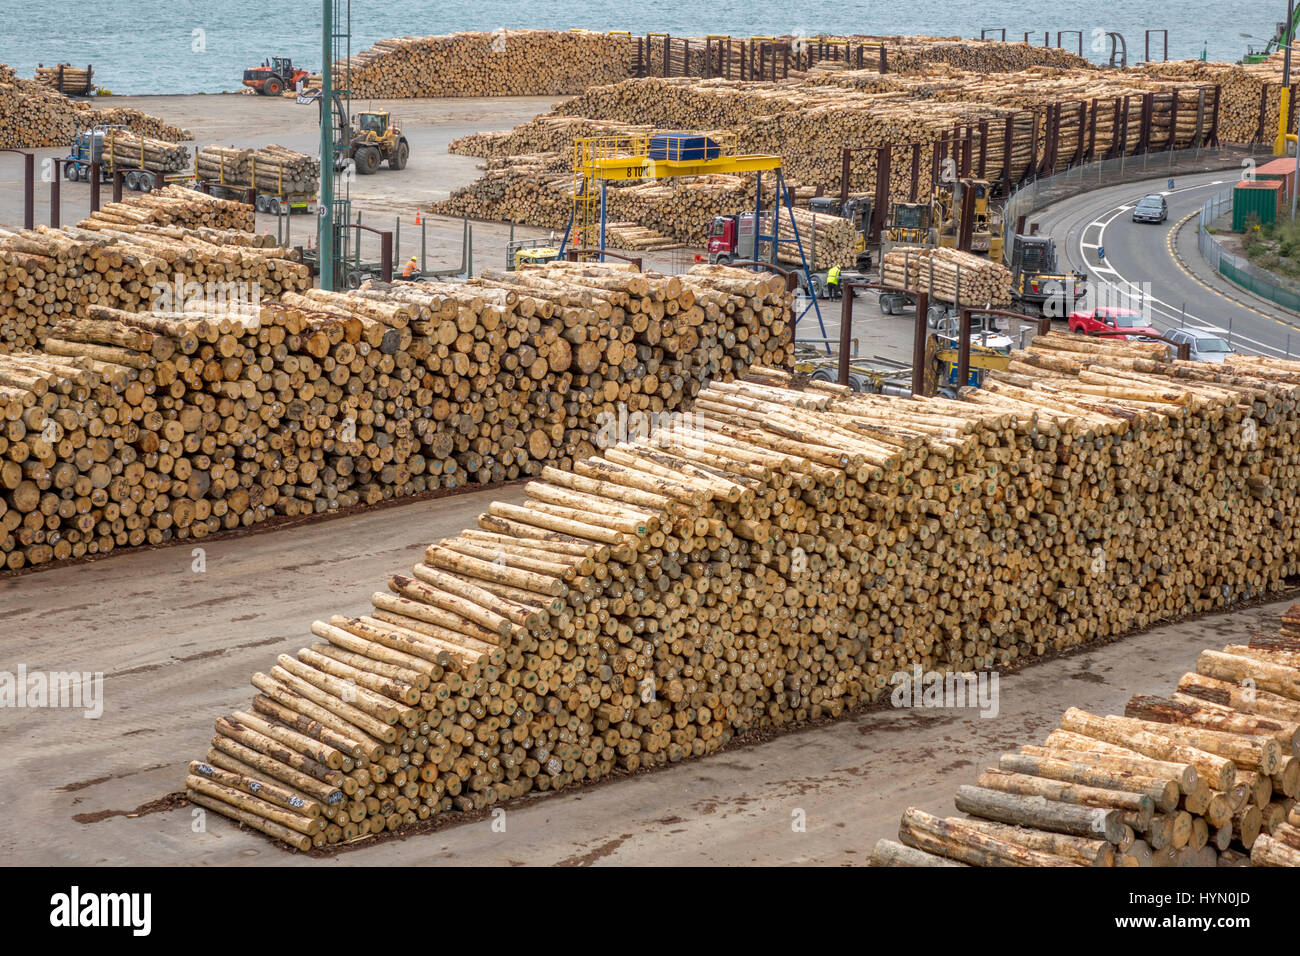 Tree Logs Sawlogs Stacked Up Ready For Shipping From Port Chalmers, Near Dunedin, New Zealand Stock Photo